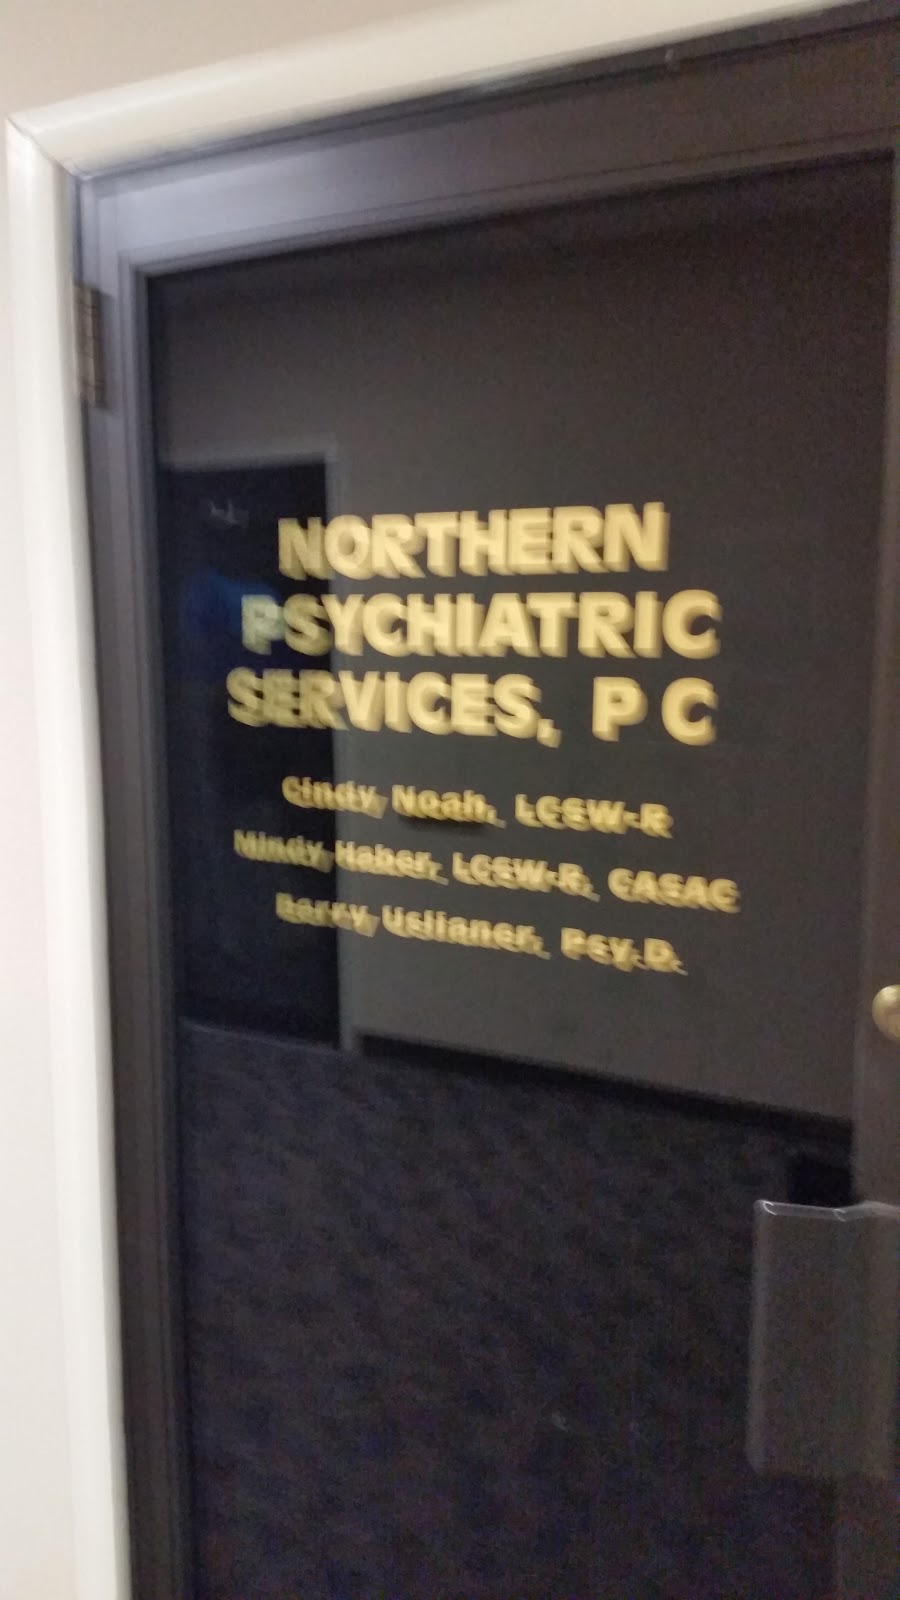 Northern Psychiatric Services: Schefflein Paul D MD | 11 Marshall Rd #2L, Wappingers Falls, NY 12590 | Phone: (845) 298-4350